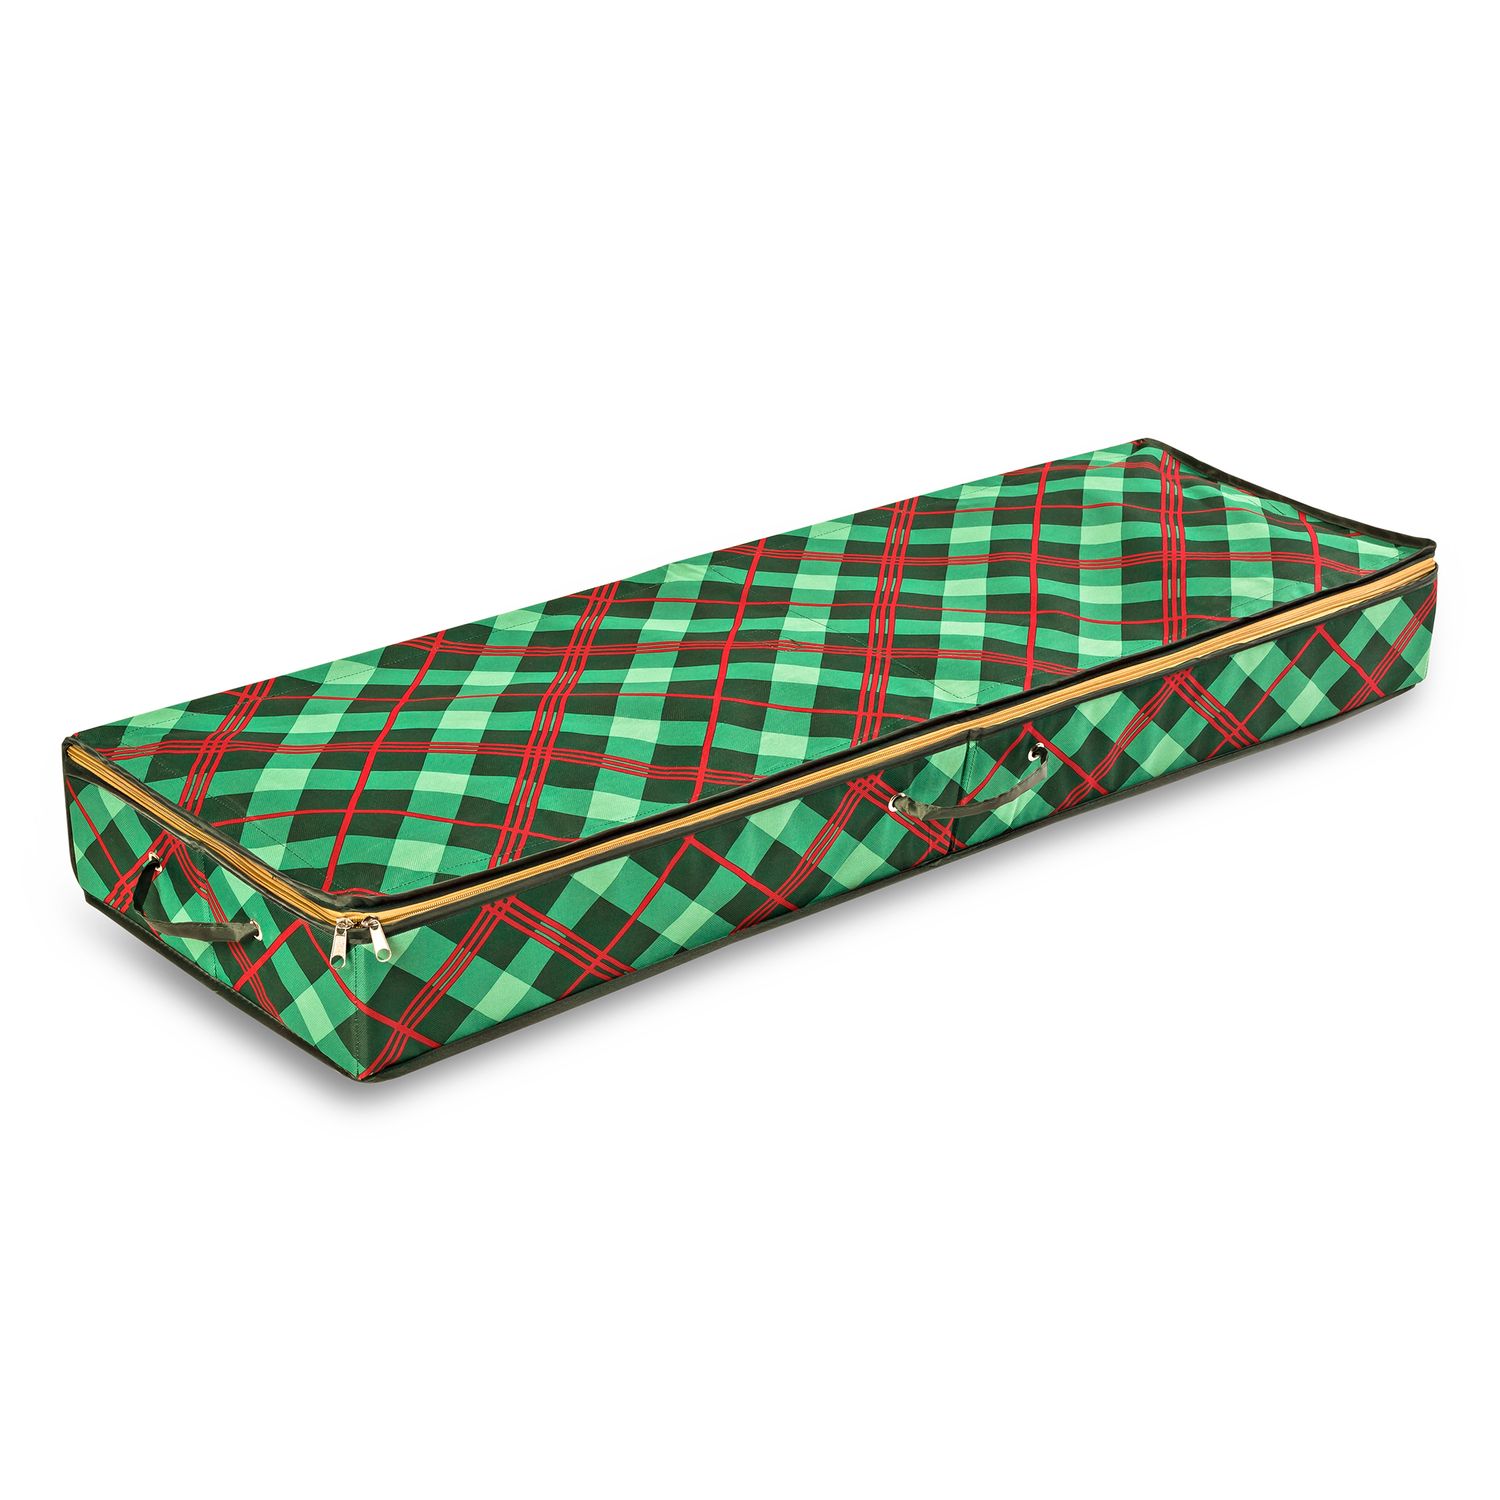 Image for Honey-Can-Do Plaid Gift Wrap Organizer at Kohl's.